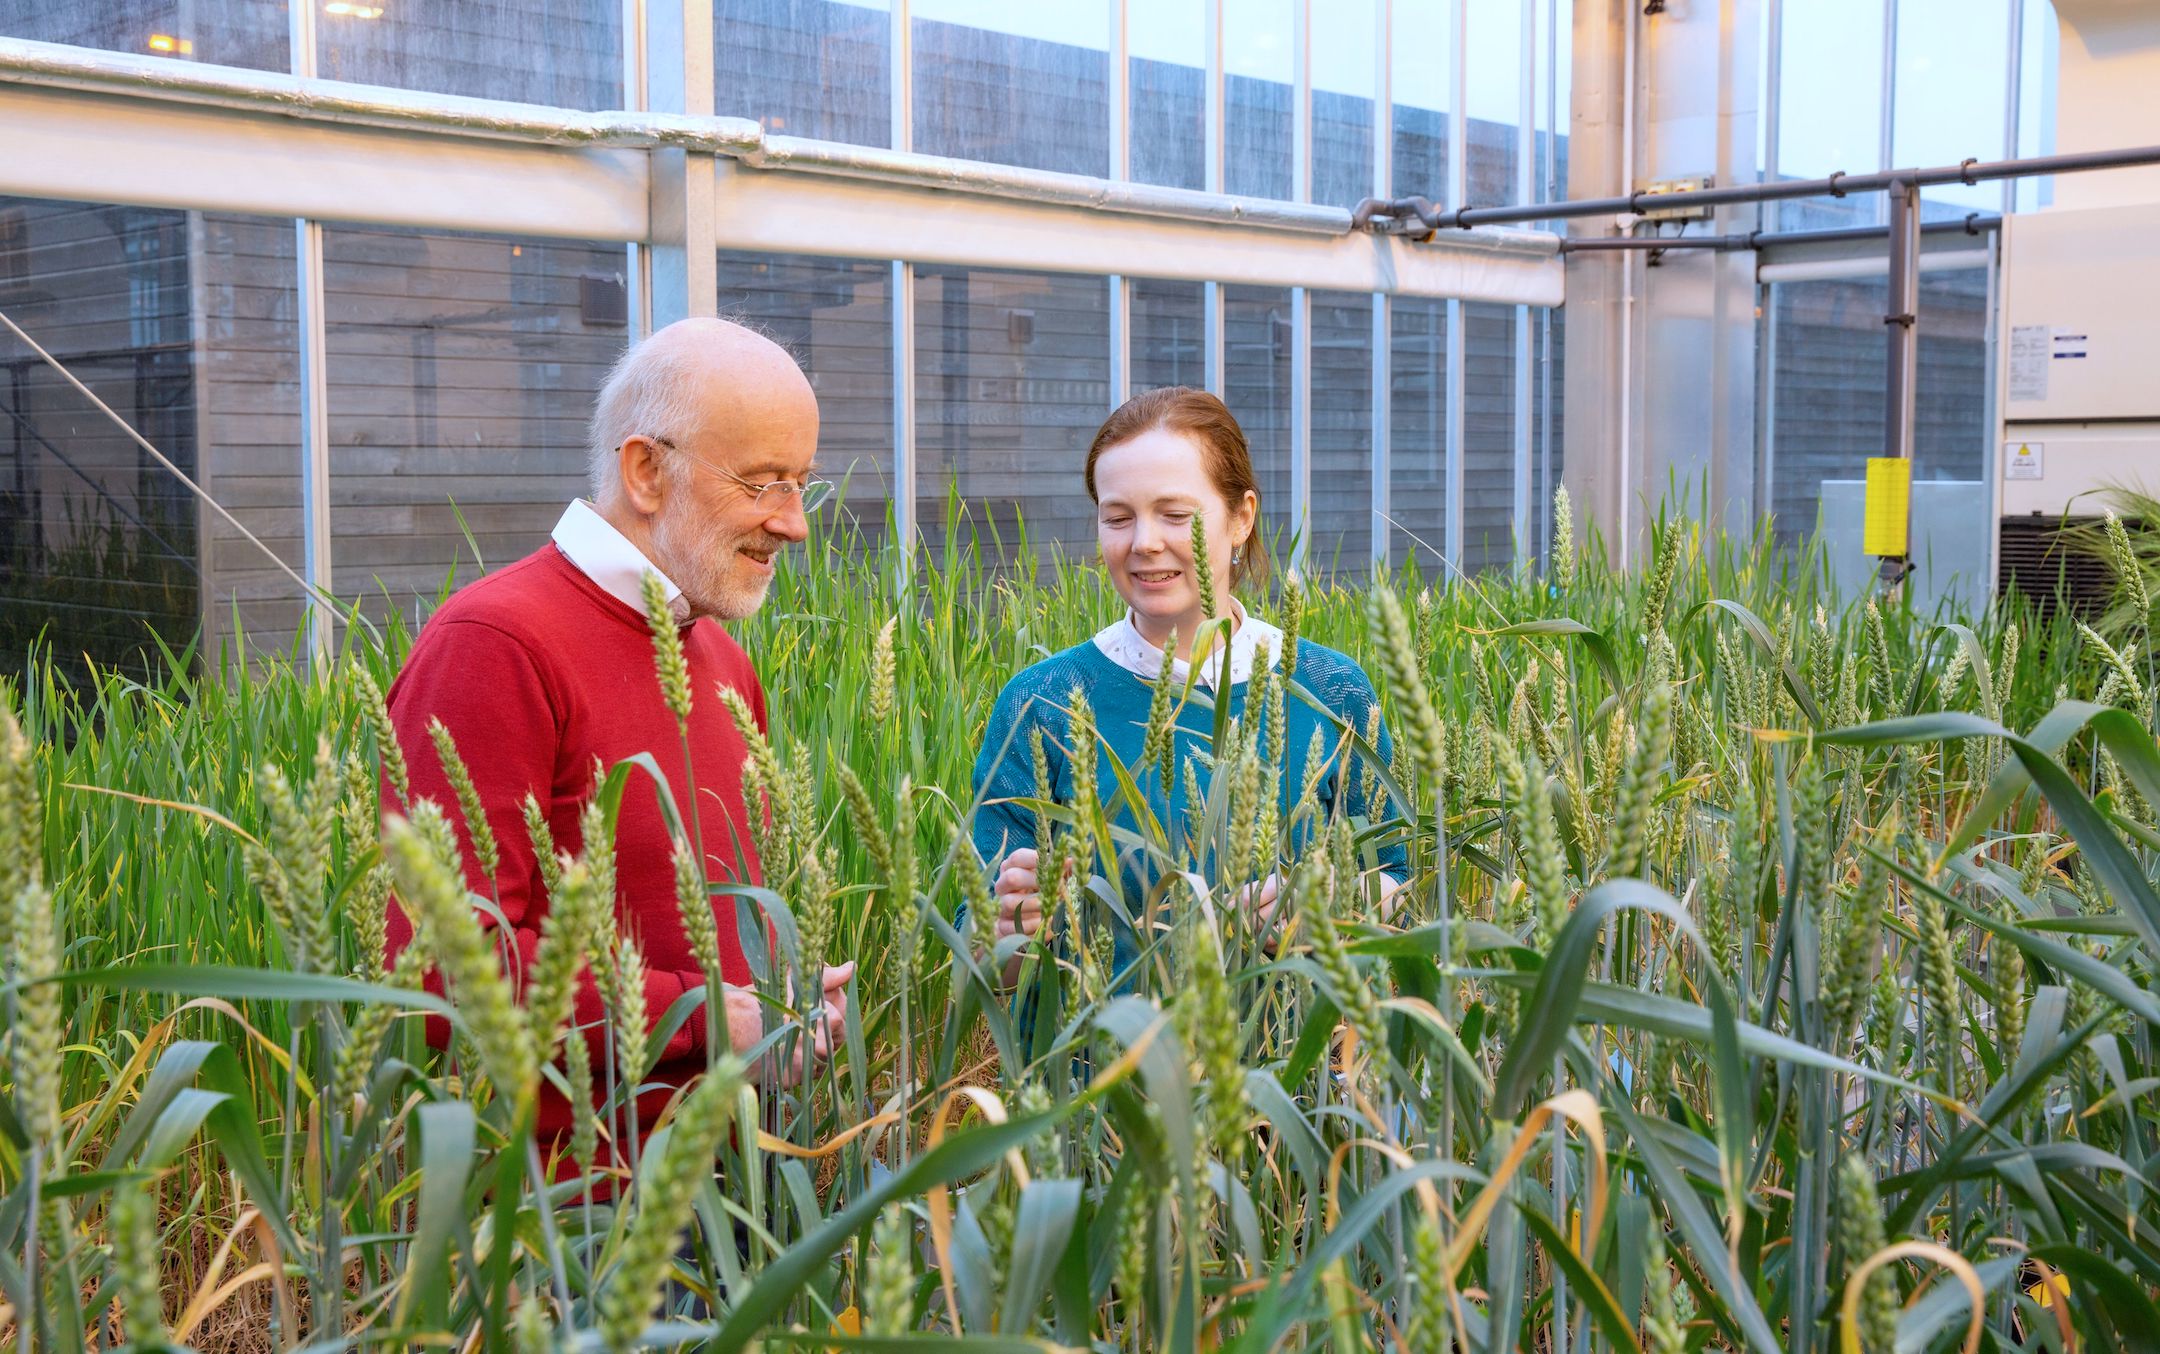 Alison Bentley (right) and Martin Jones inspect wheat in a glasshouse. (Photo: Toby Smith/Gloknos)